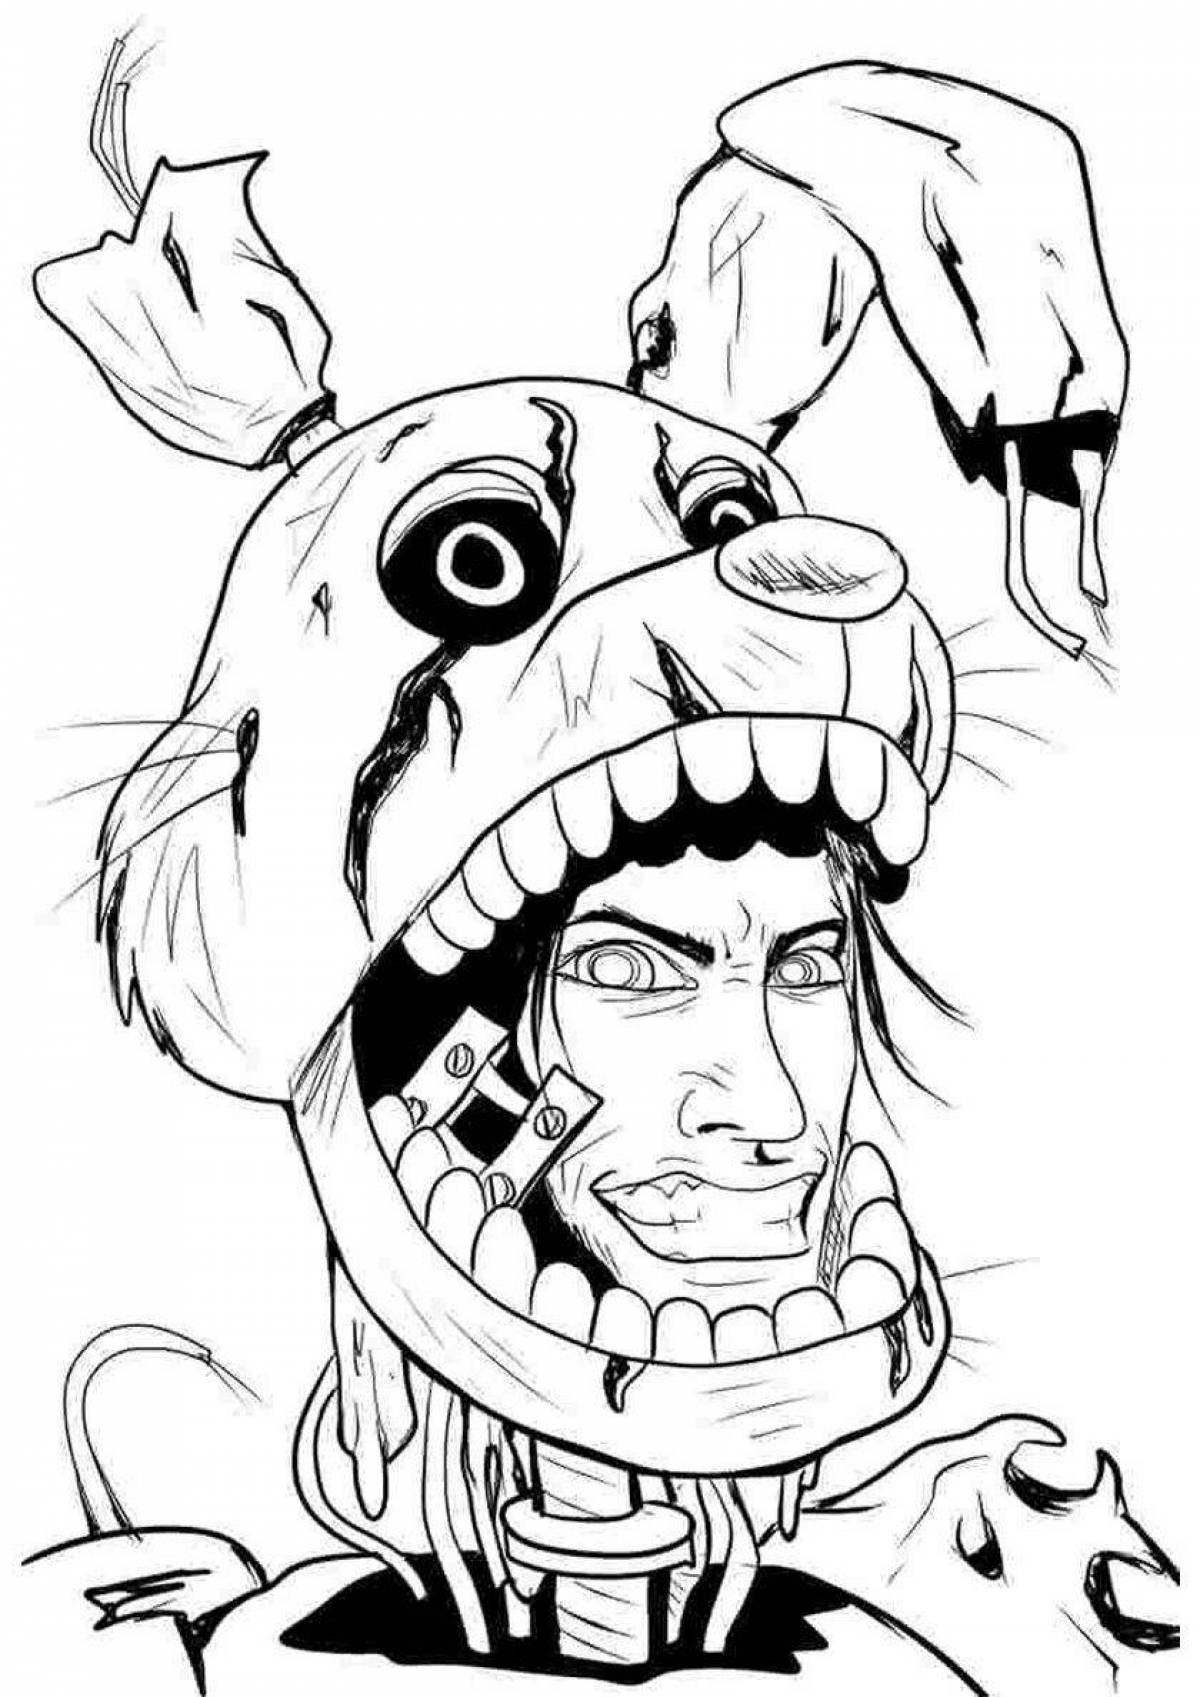 Radiant coloring page of springtrap